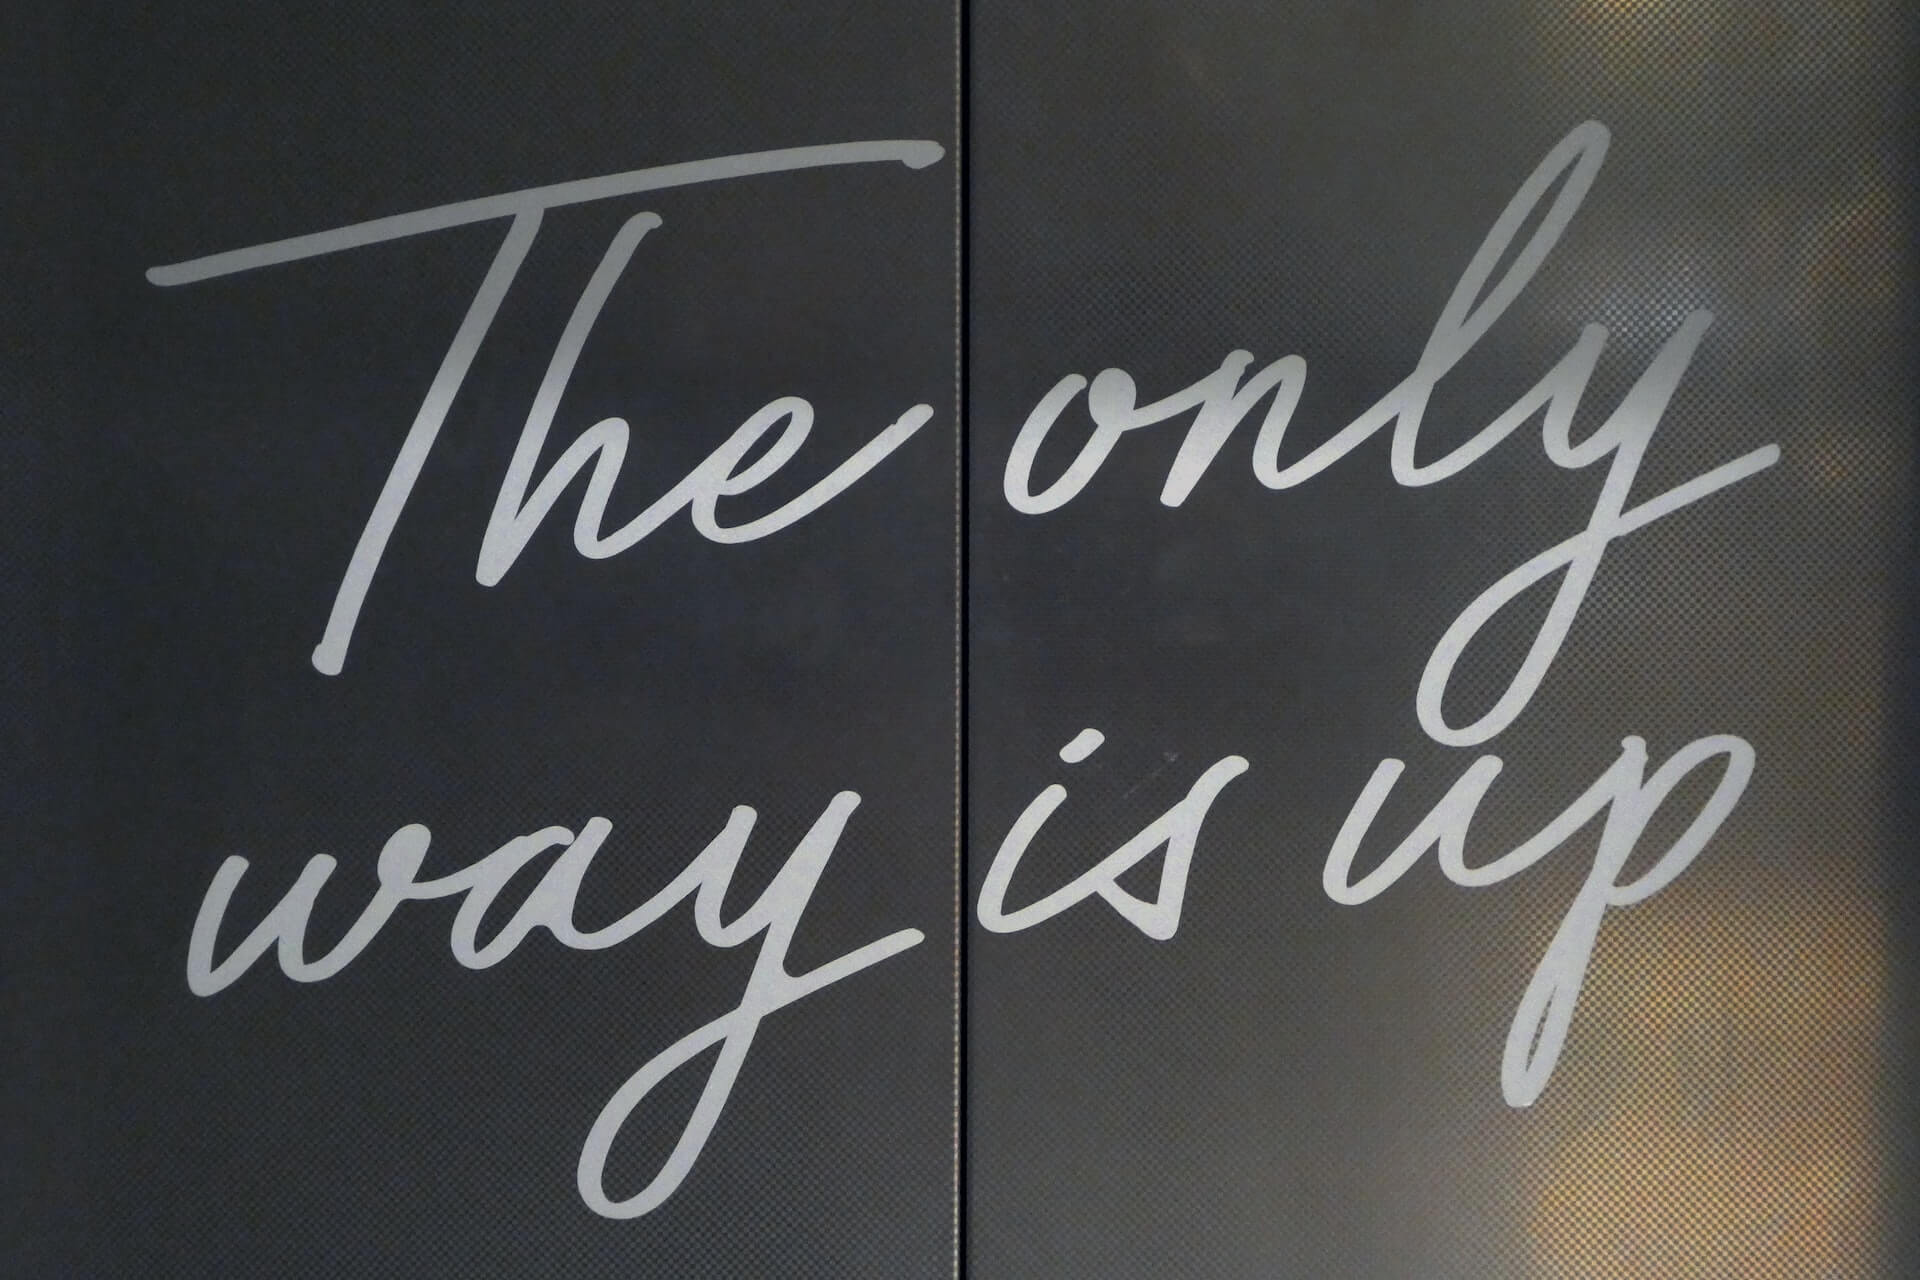 "The only way is up" sign